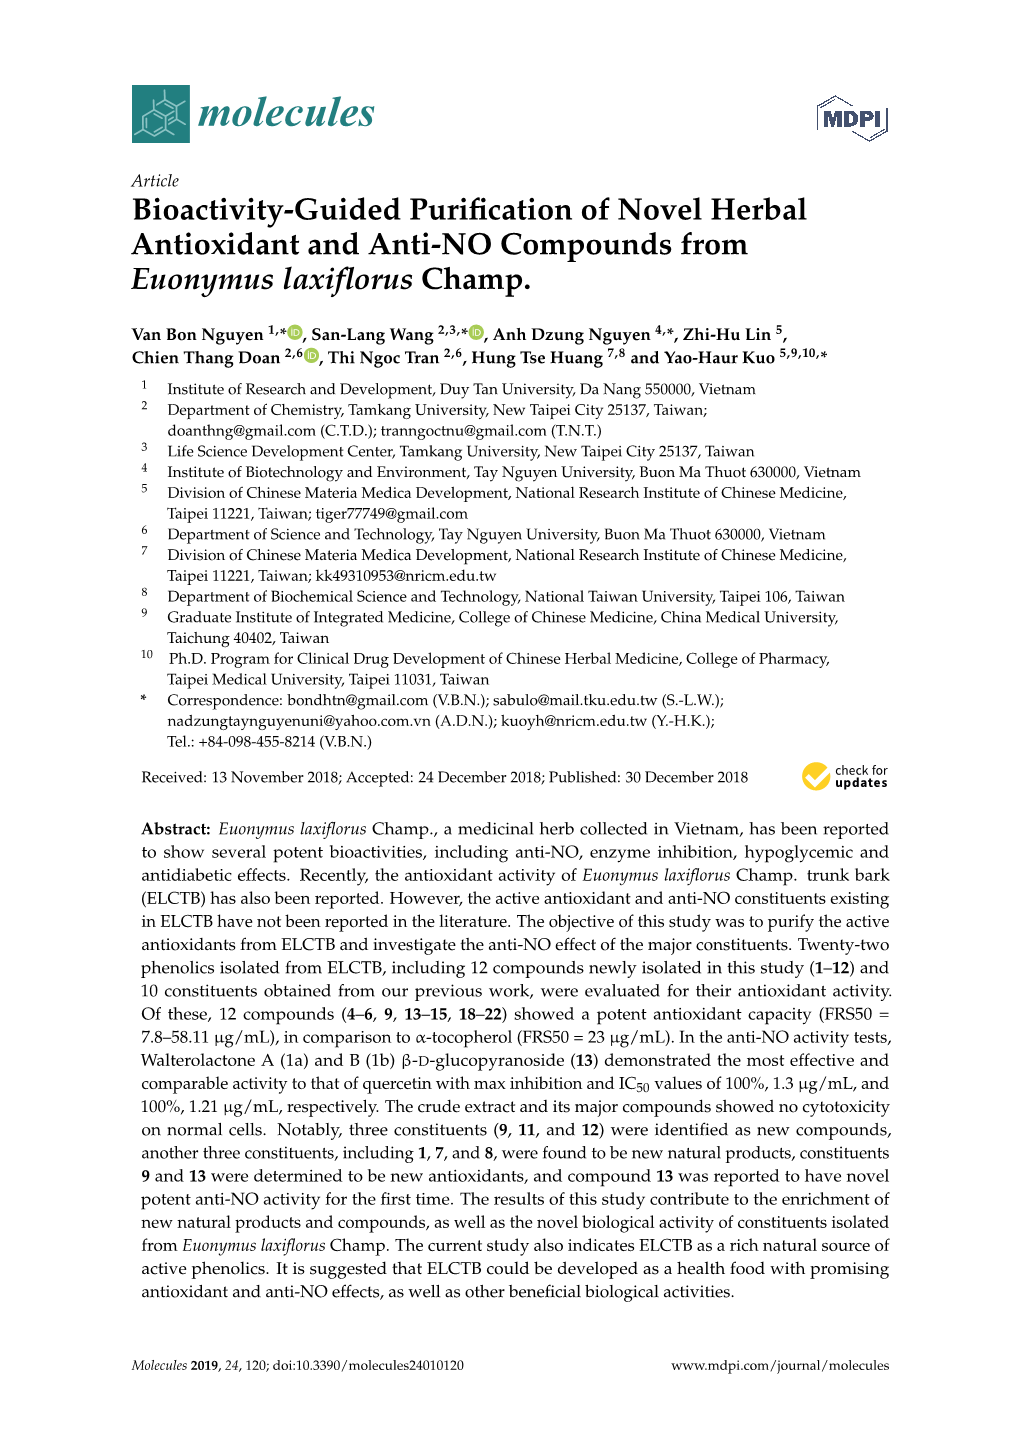 Bioactivity-Guided Purification of Novel Herbal Antioxidant and Anti